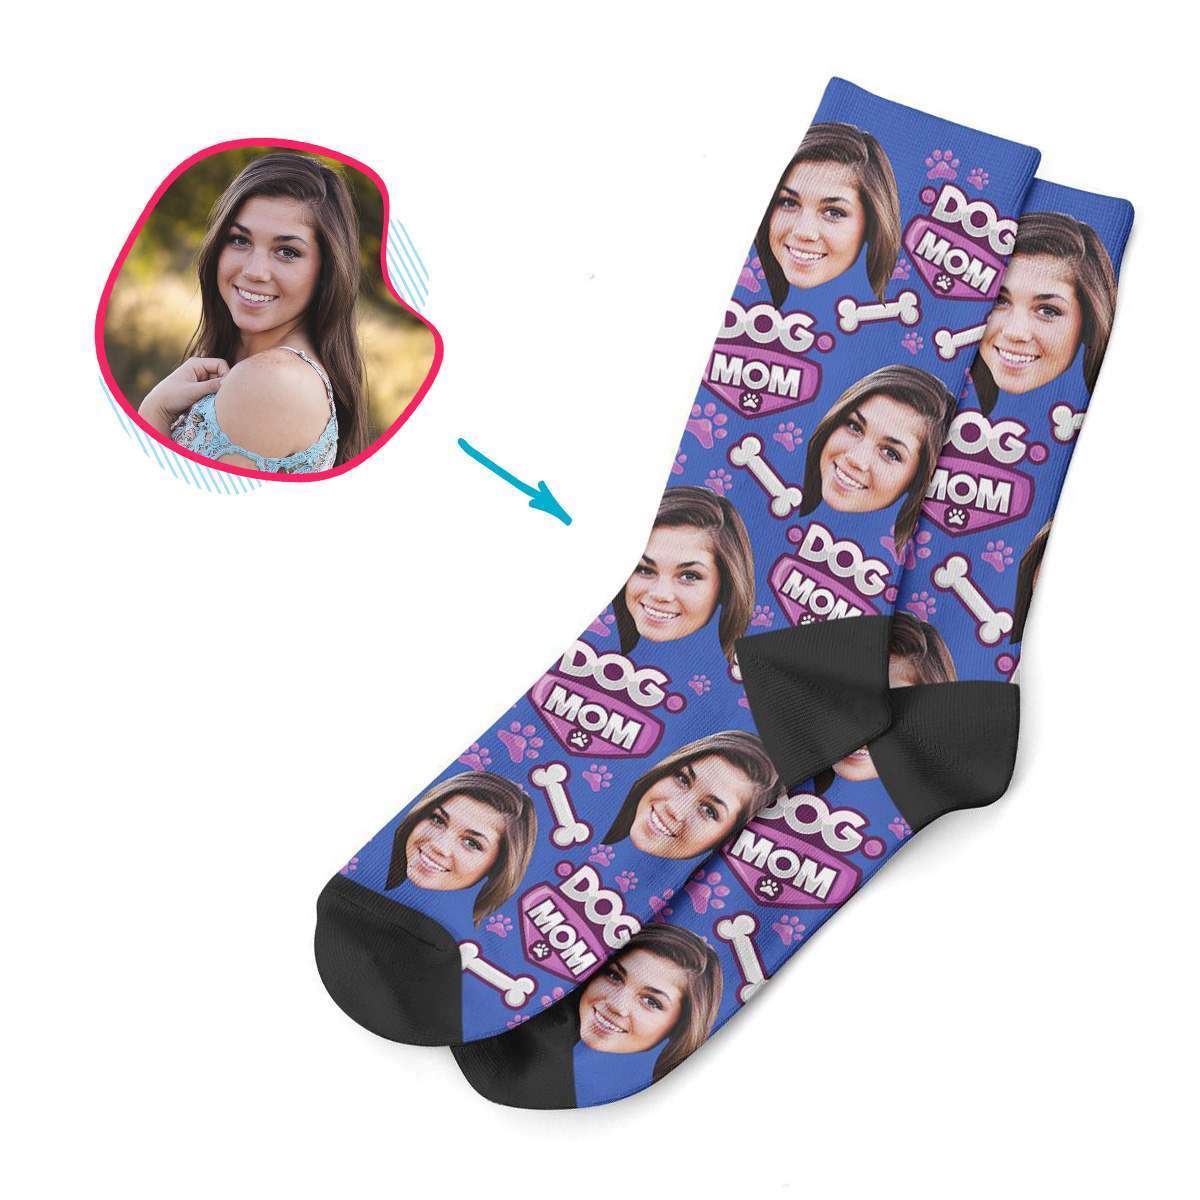 darkblue Dog Mom socks personalized with photo of face printed on them